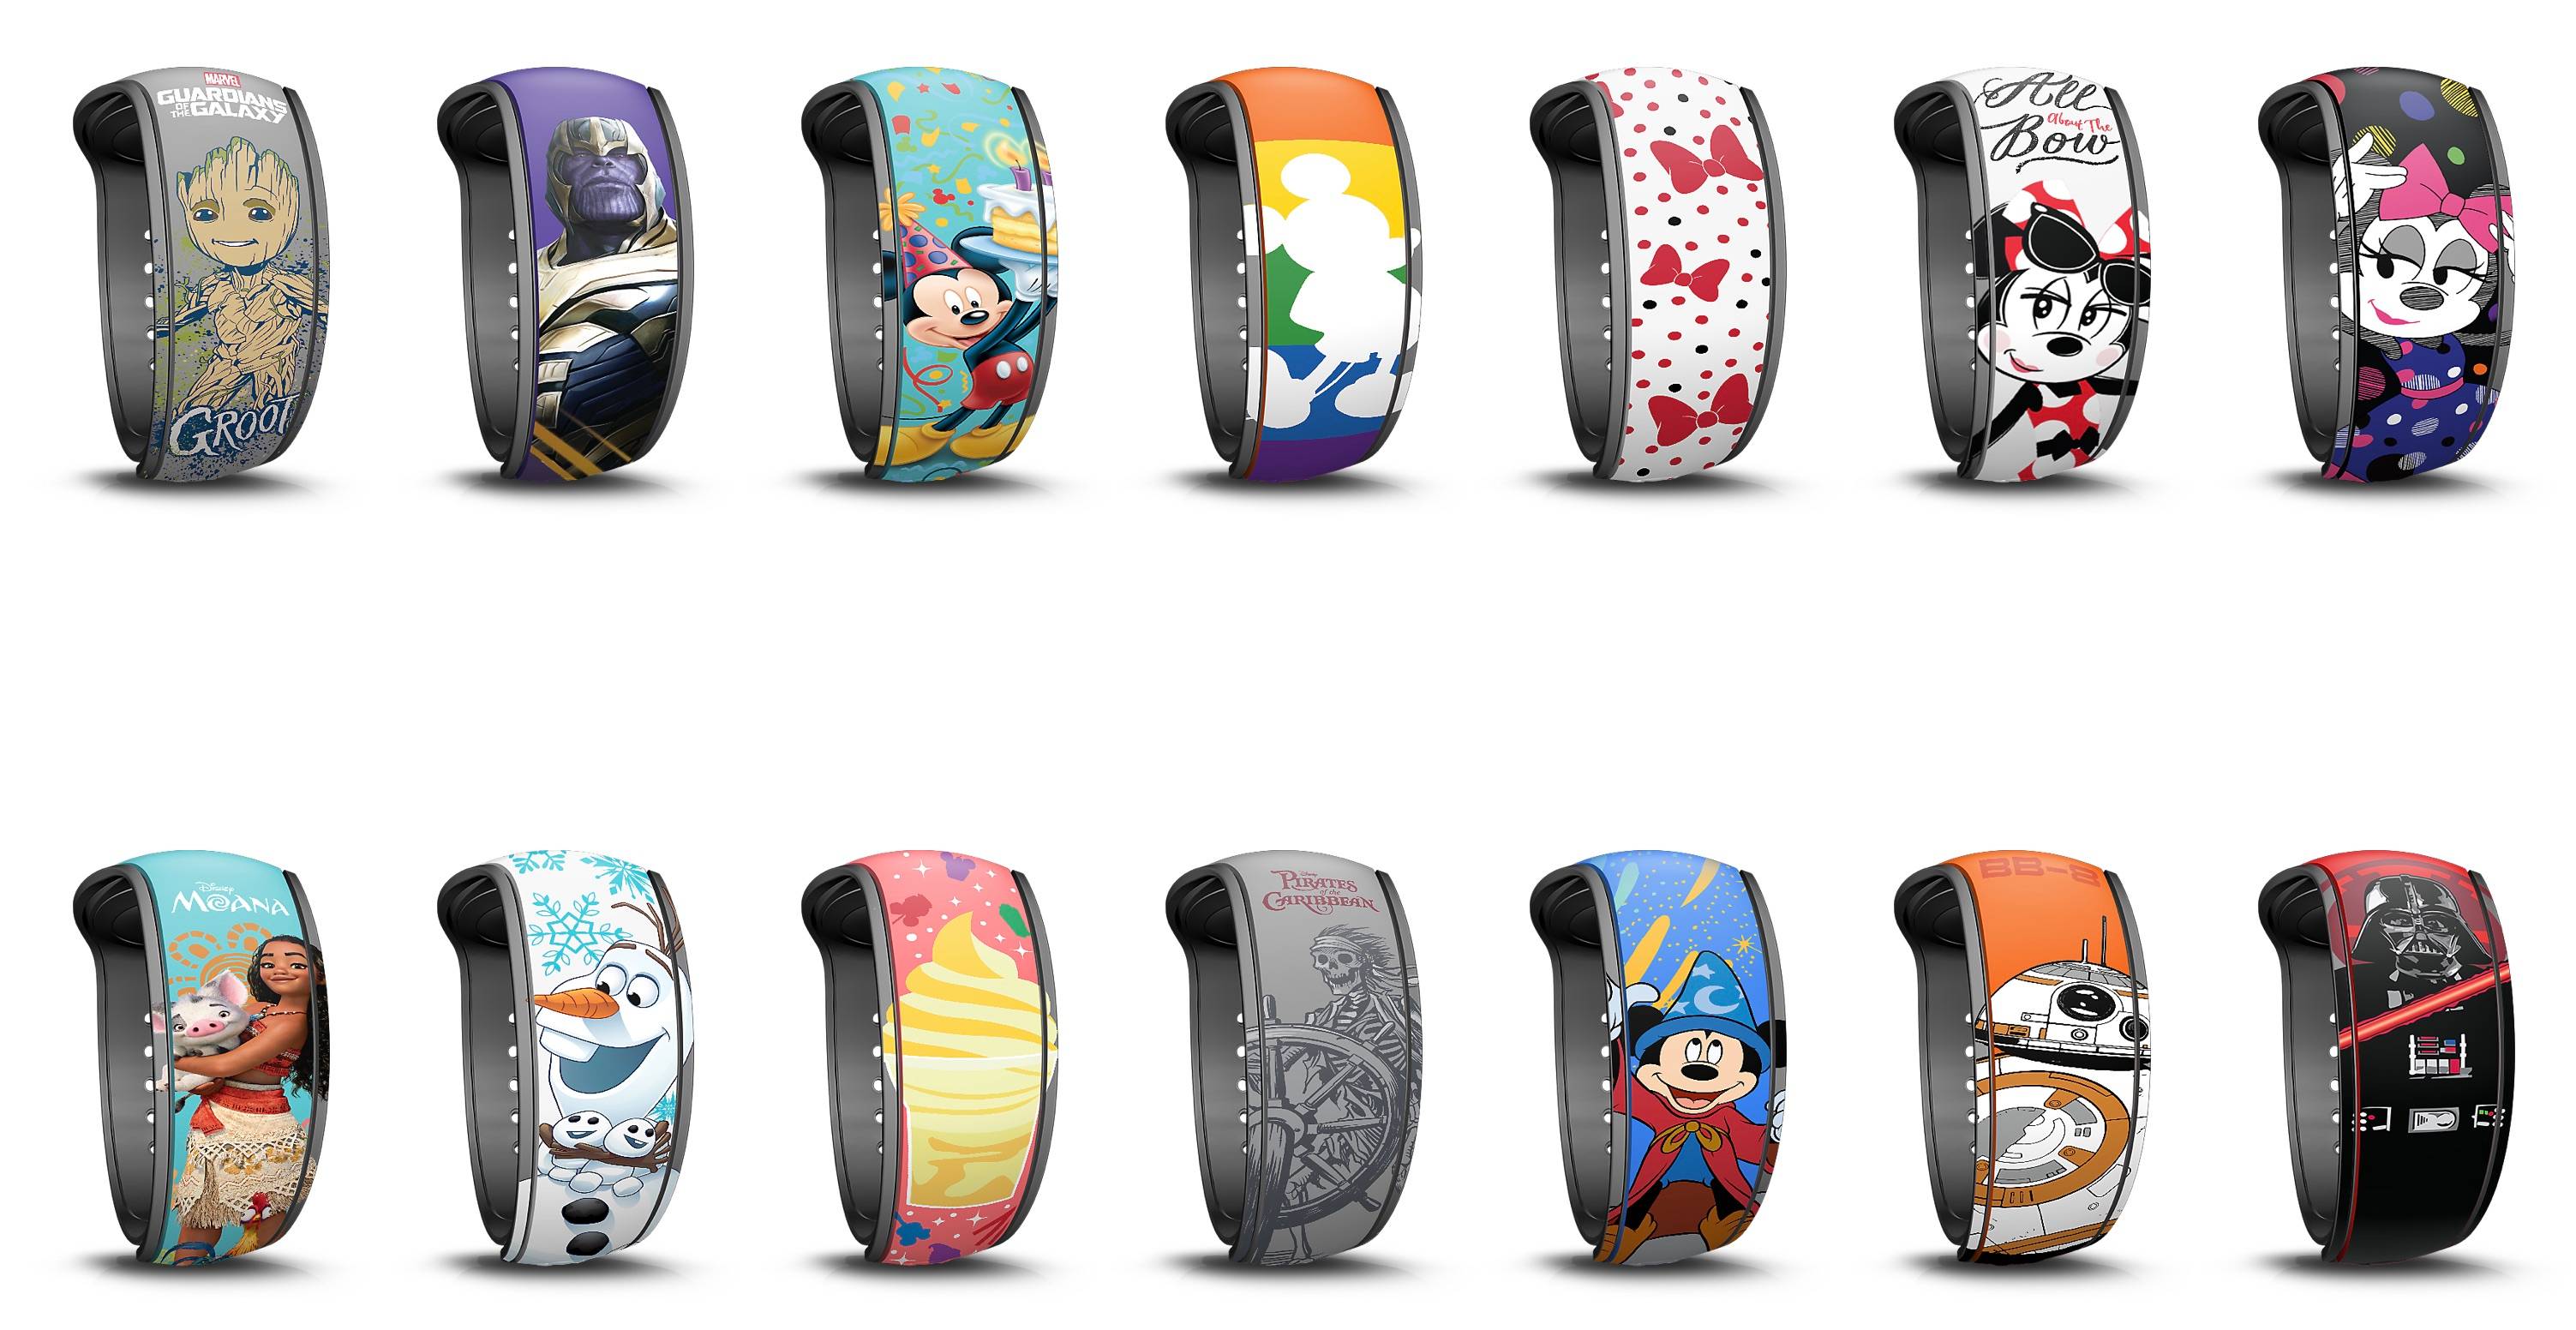 New MagicBand upgrade options are now available